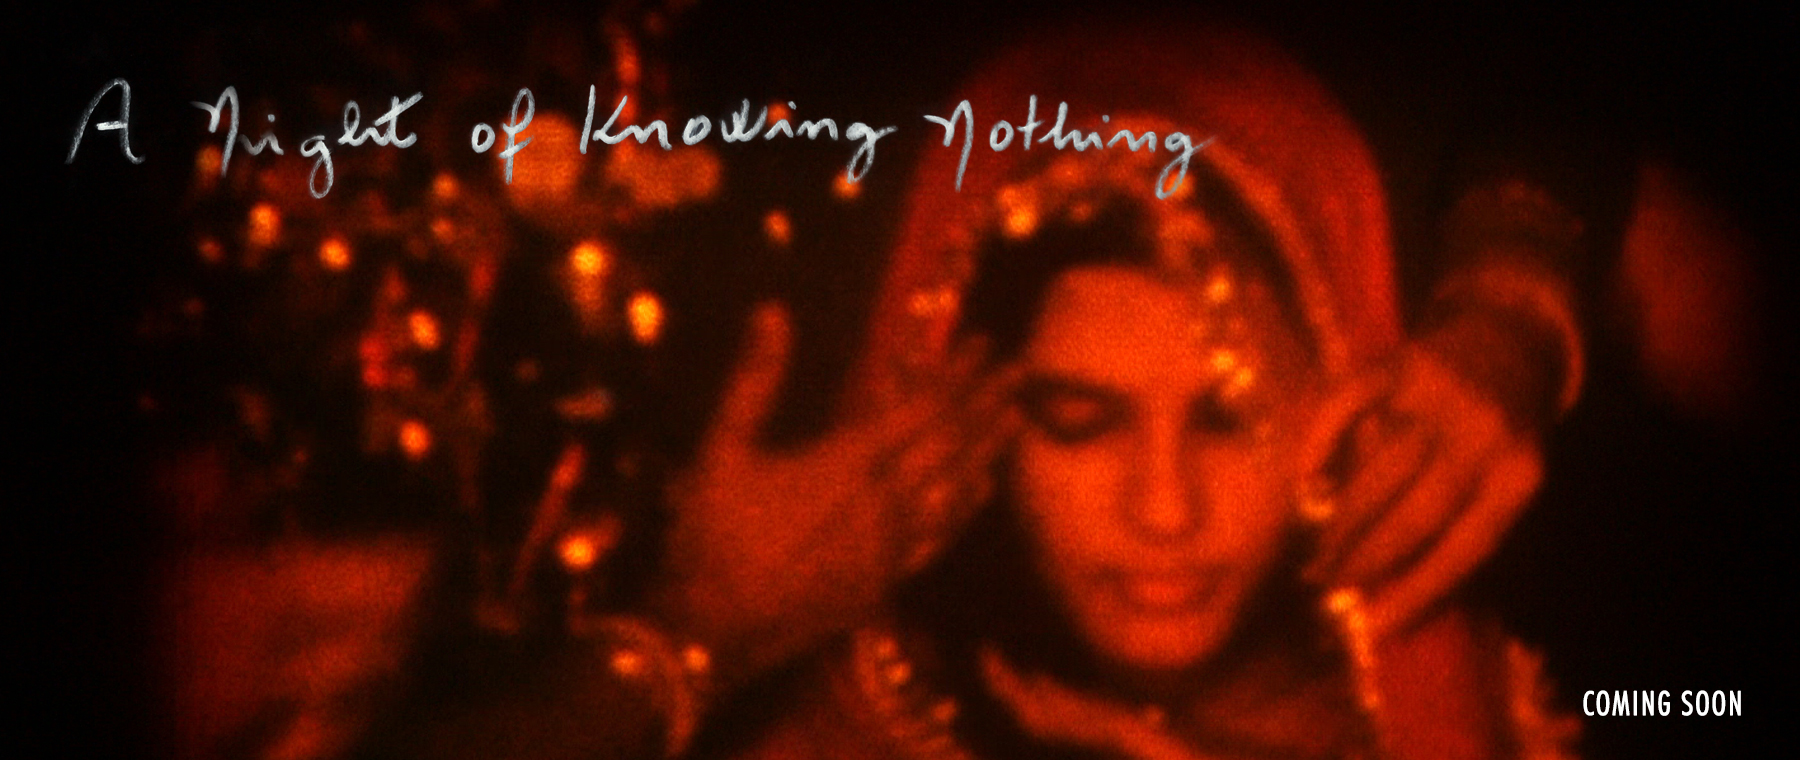 A Night of Knowing Nothing